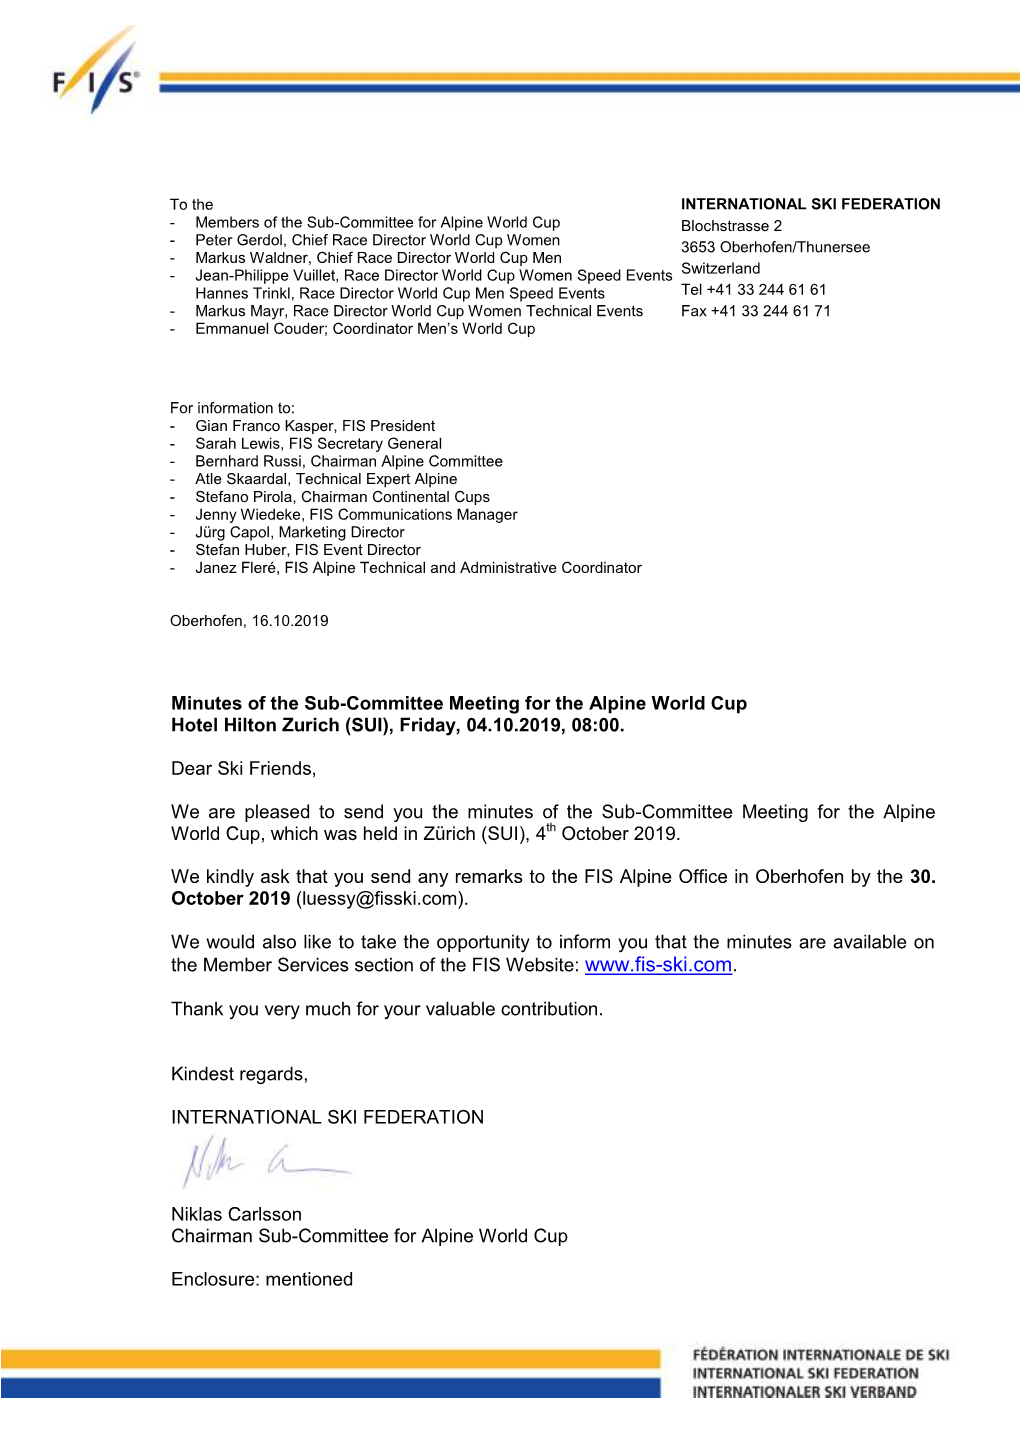 Minutes of the Sub-Committee Meeting for the Alpine World Cup Hotel Hilton Zurich (SUI), Friday, 04.10.2019, 08:00